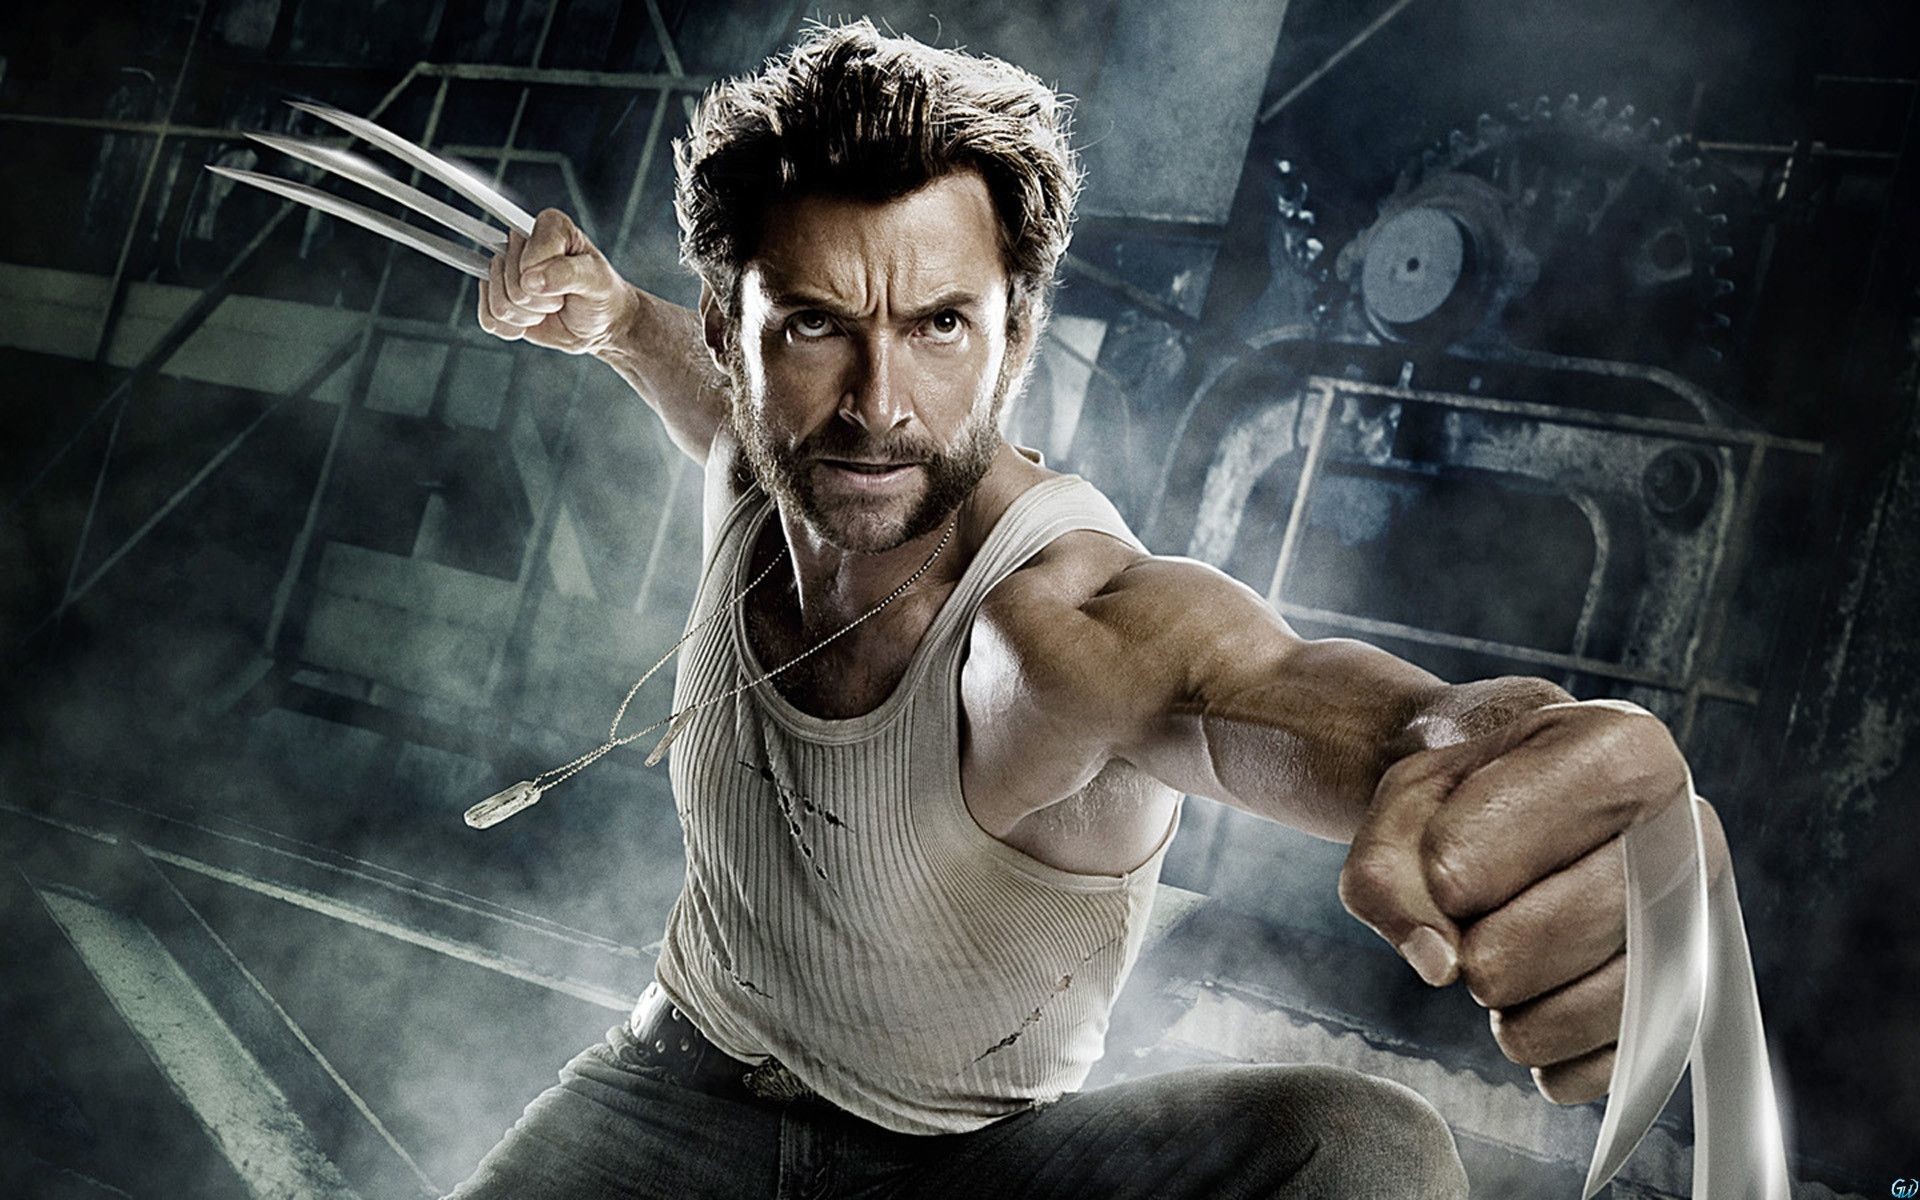 1920x1200 Claws Celebre: Starring as the "X-Men's" Wolverine made a star out of Hugh  Jackman. But the hairy mutant floundered in "X-Men Origins: Wolverine.